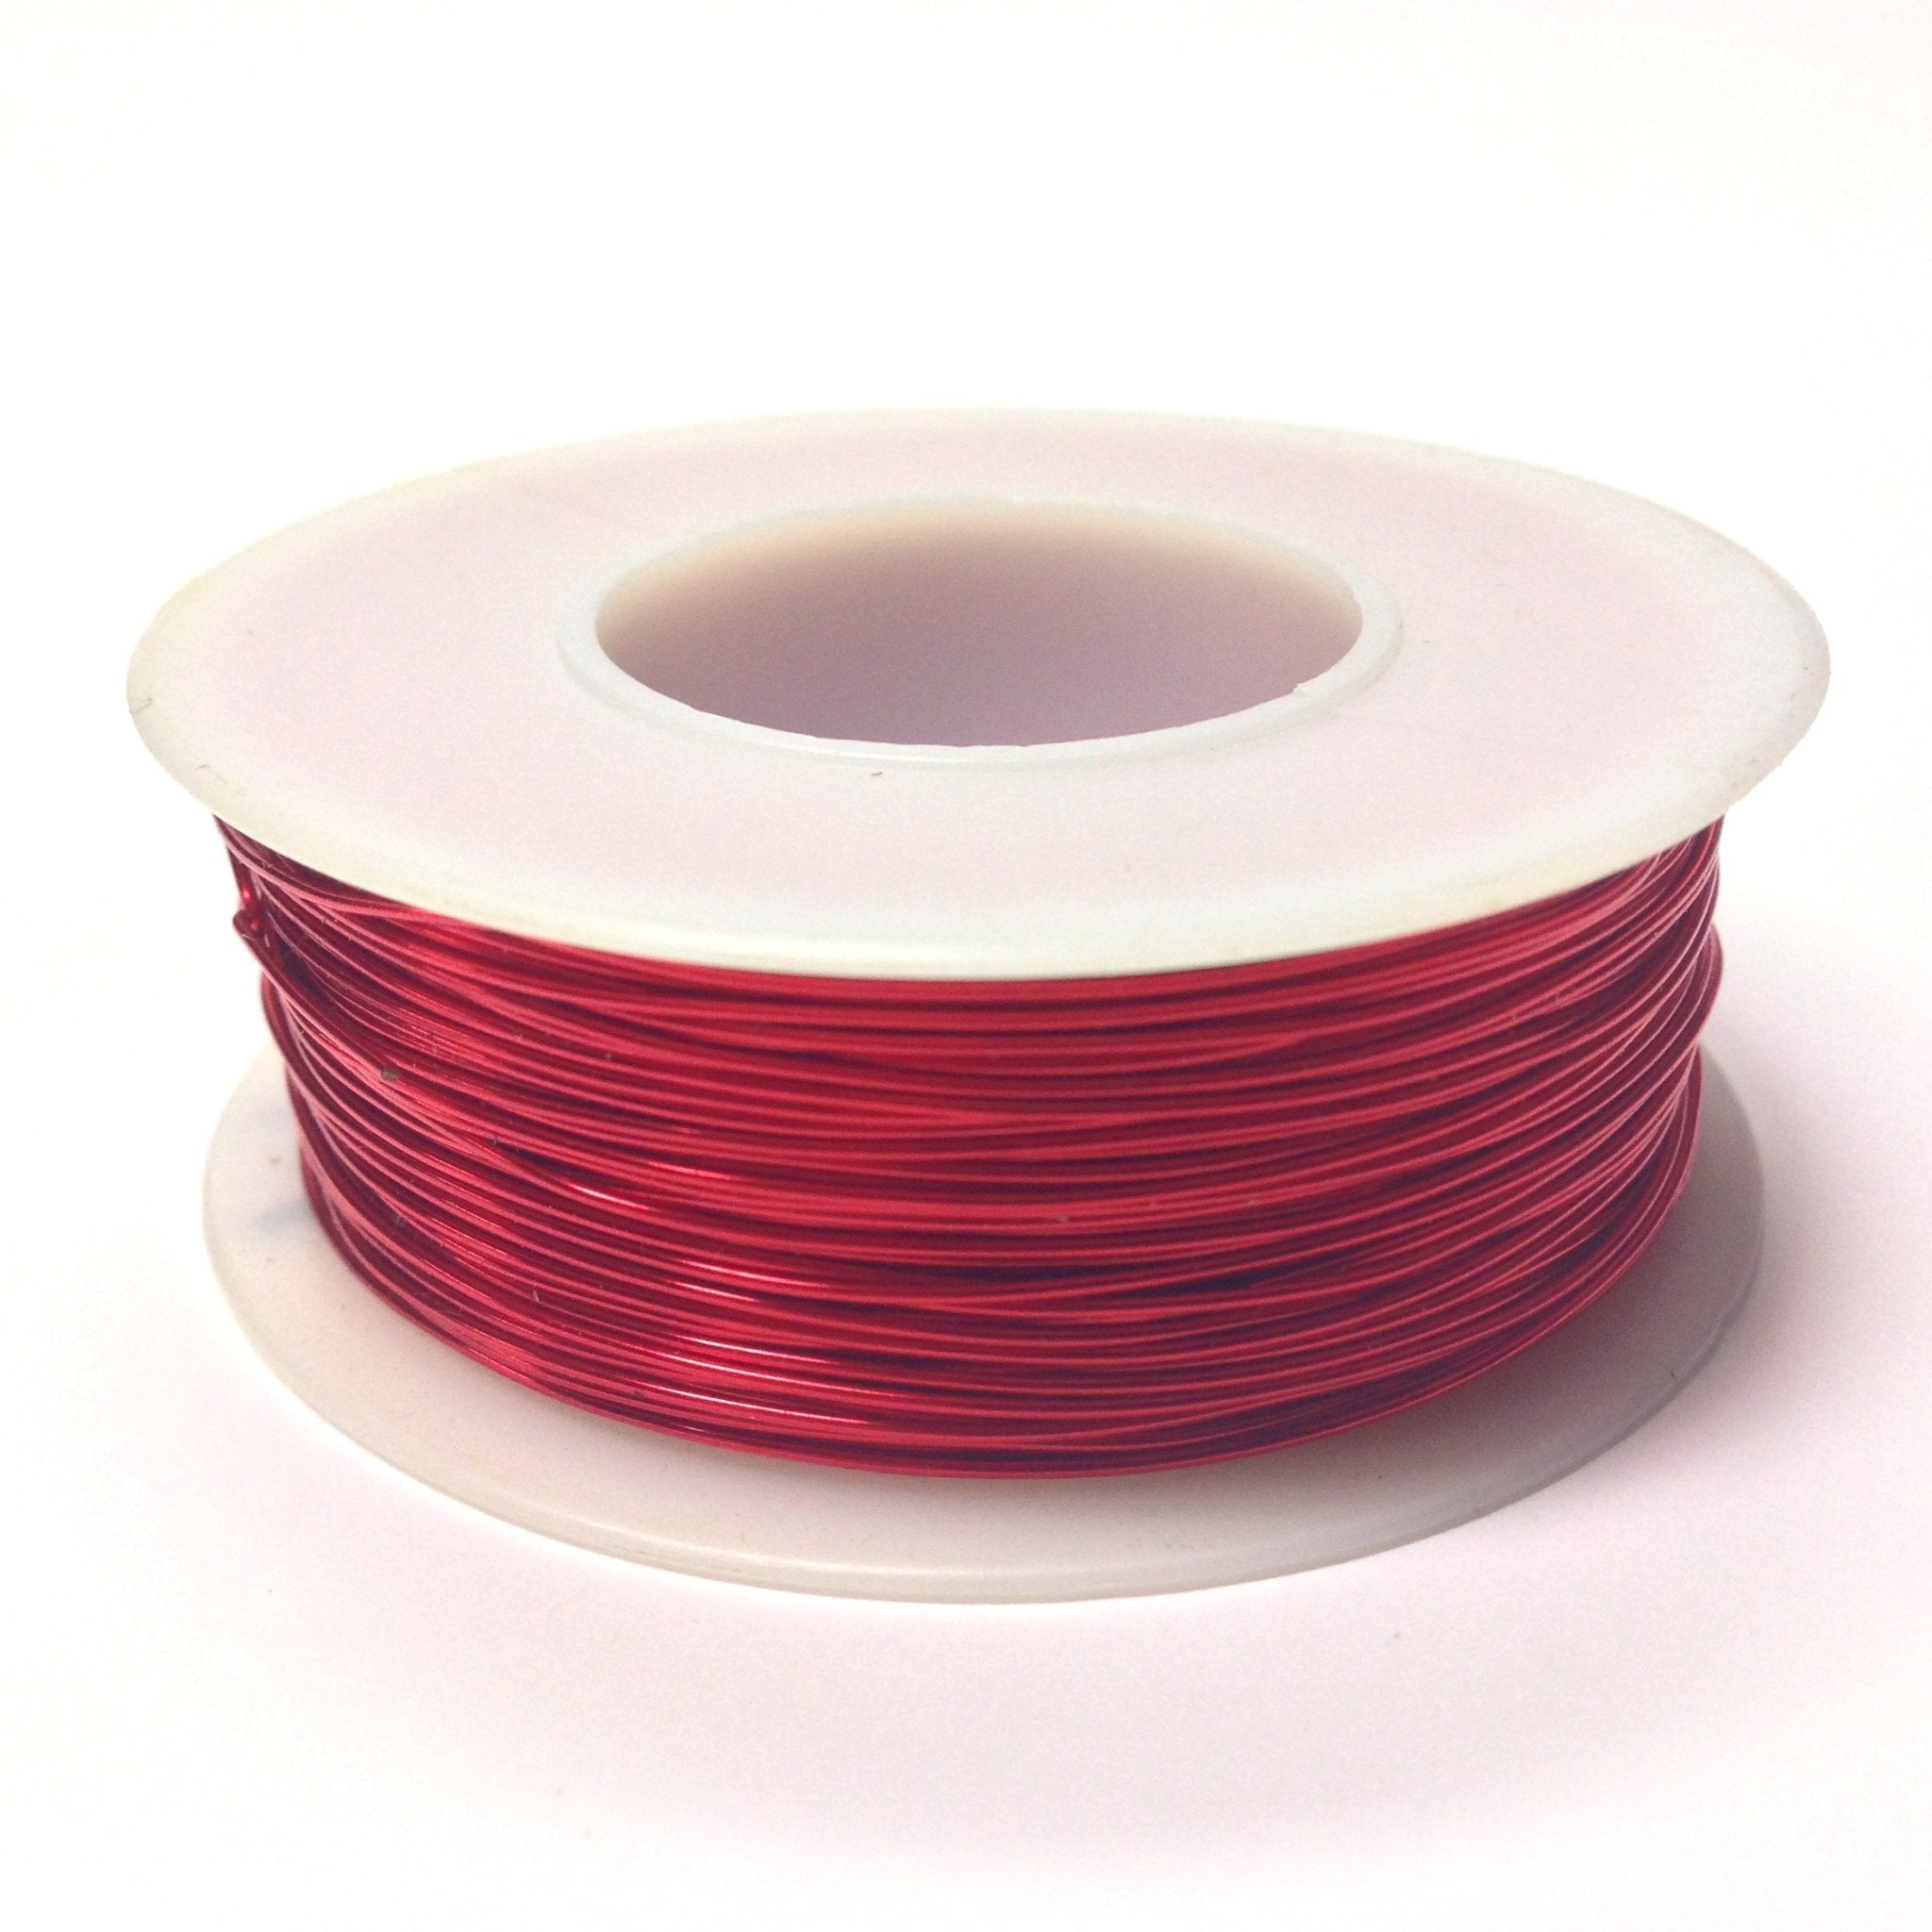 Electrical Characteristics of AWG Copper Wire